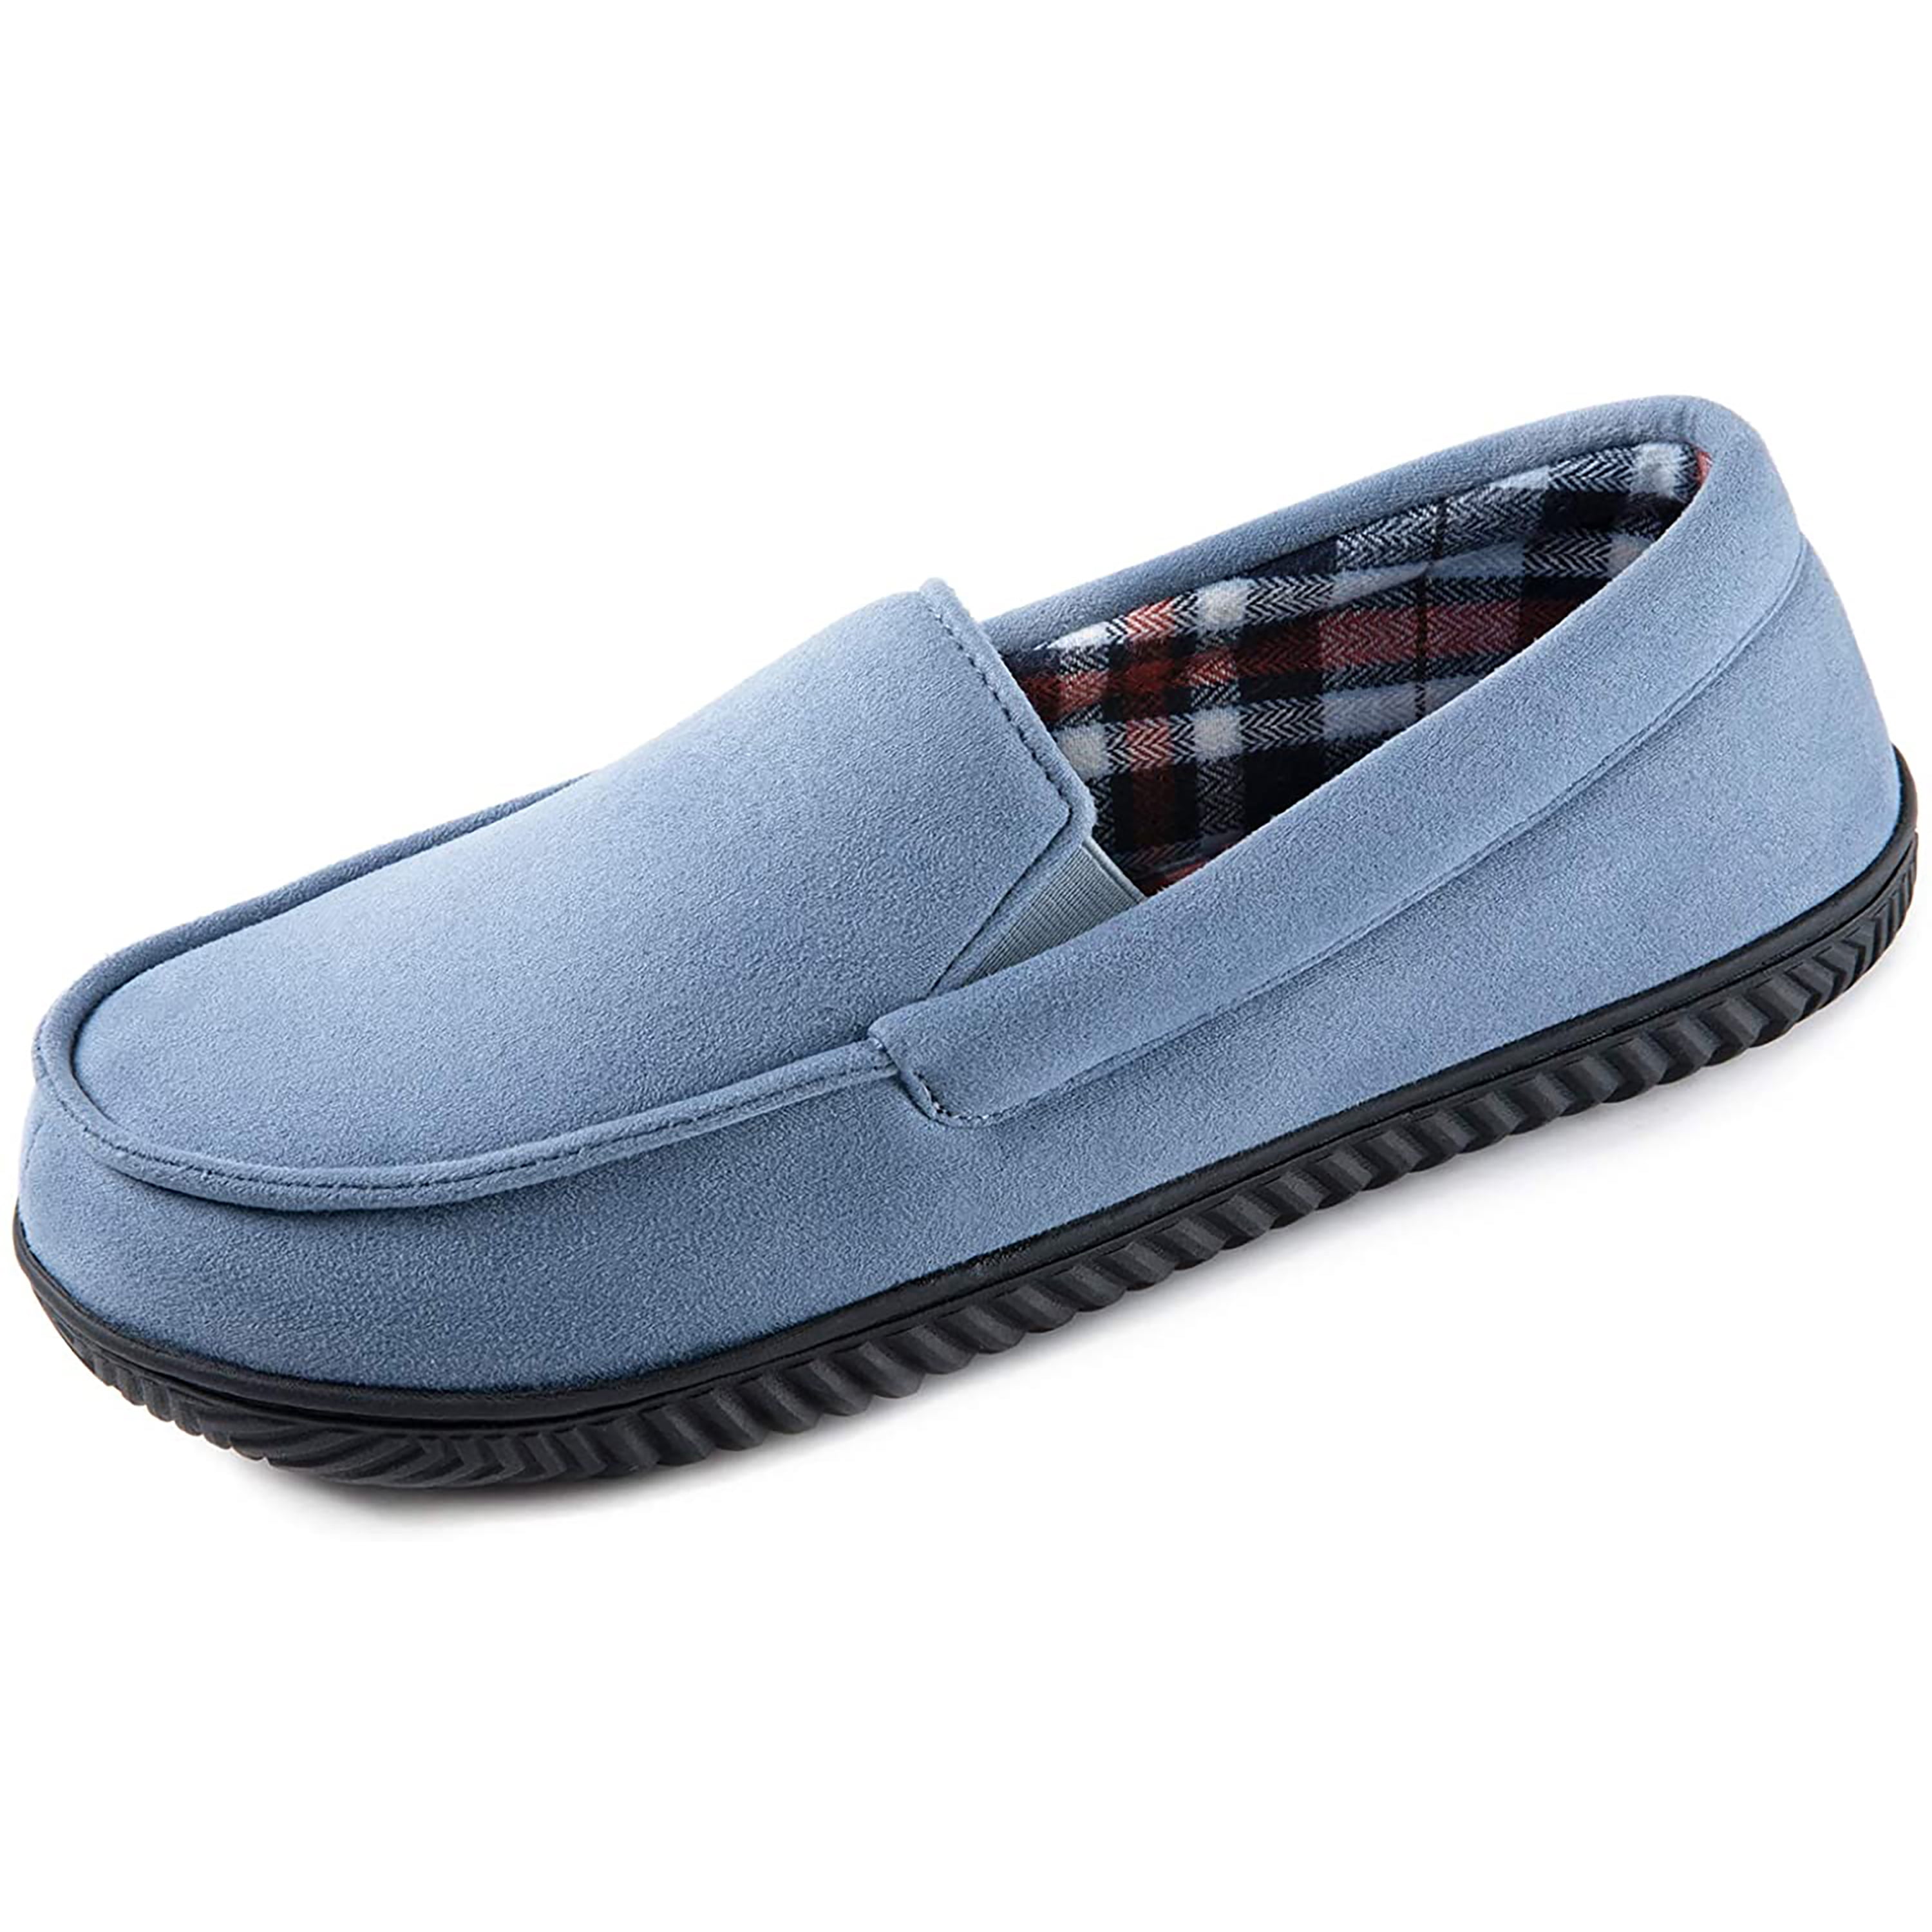 flannel lined crocs